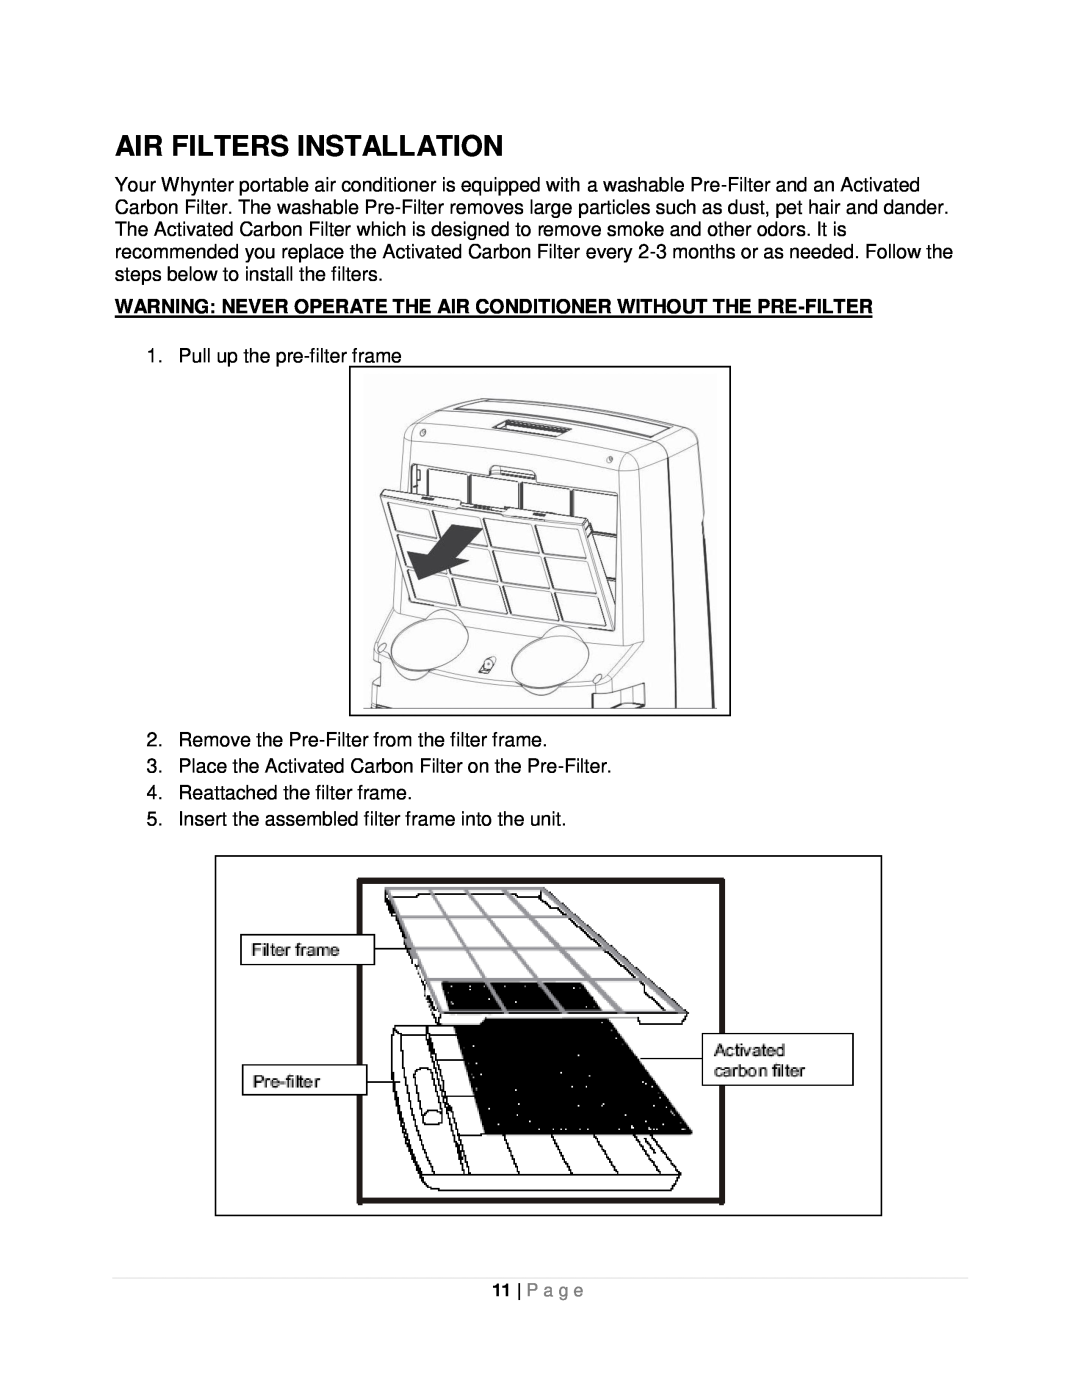 Whynter ARC-12SDH instruction manual Air Filters Installation 